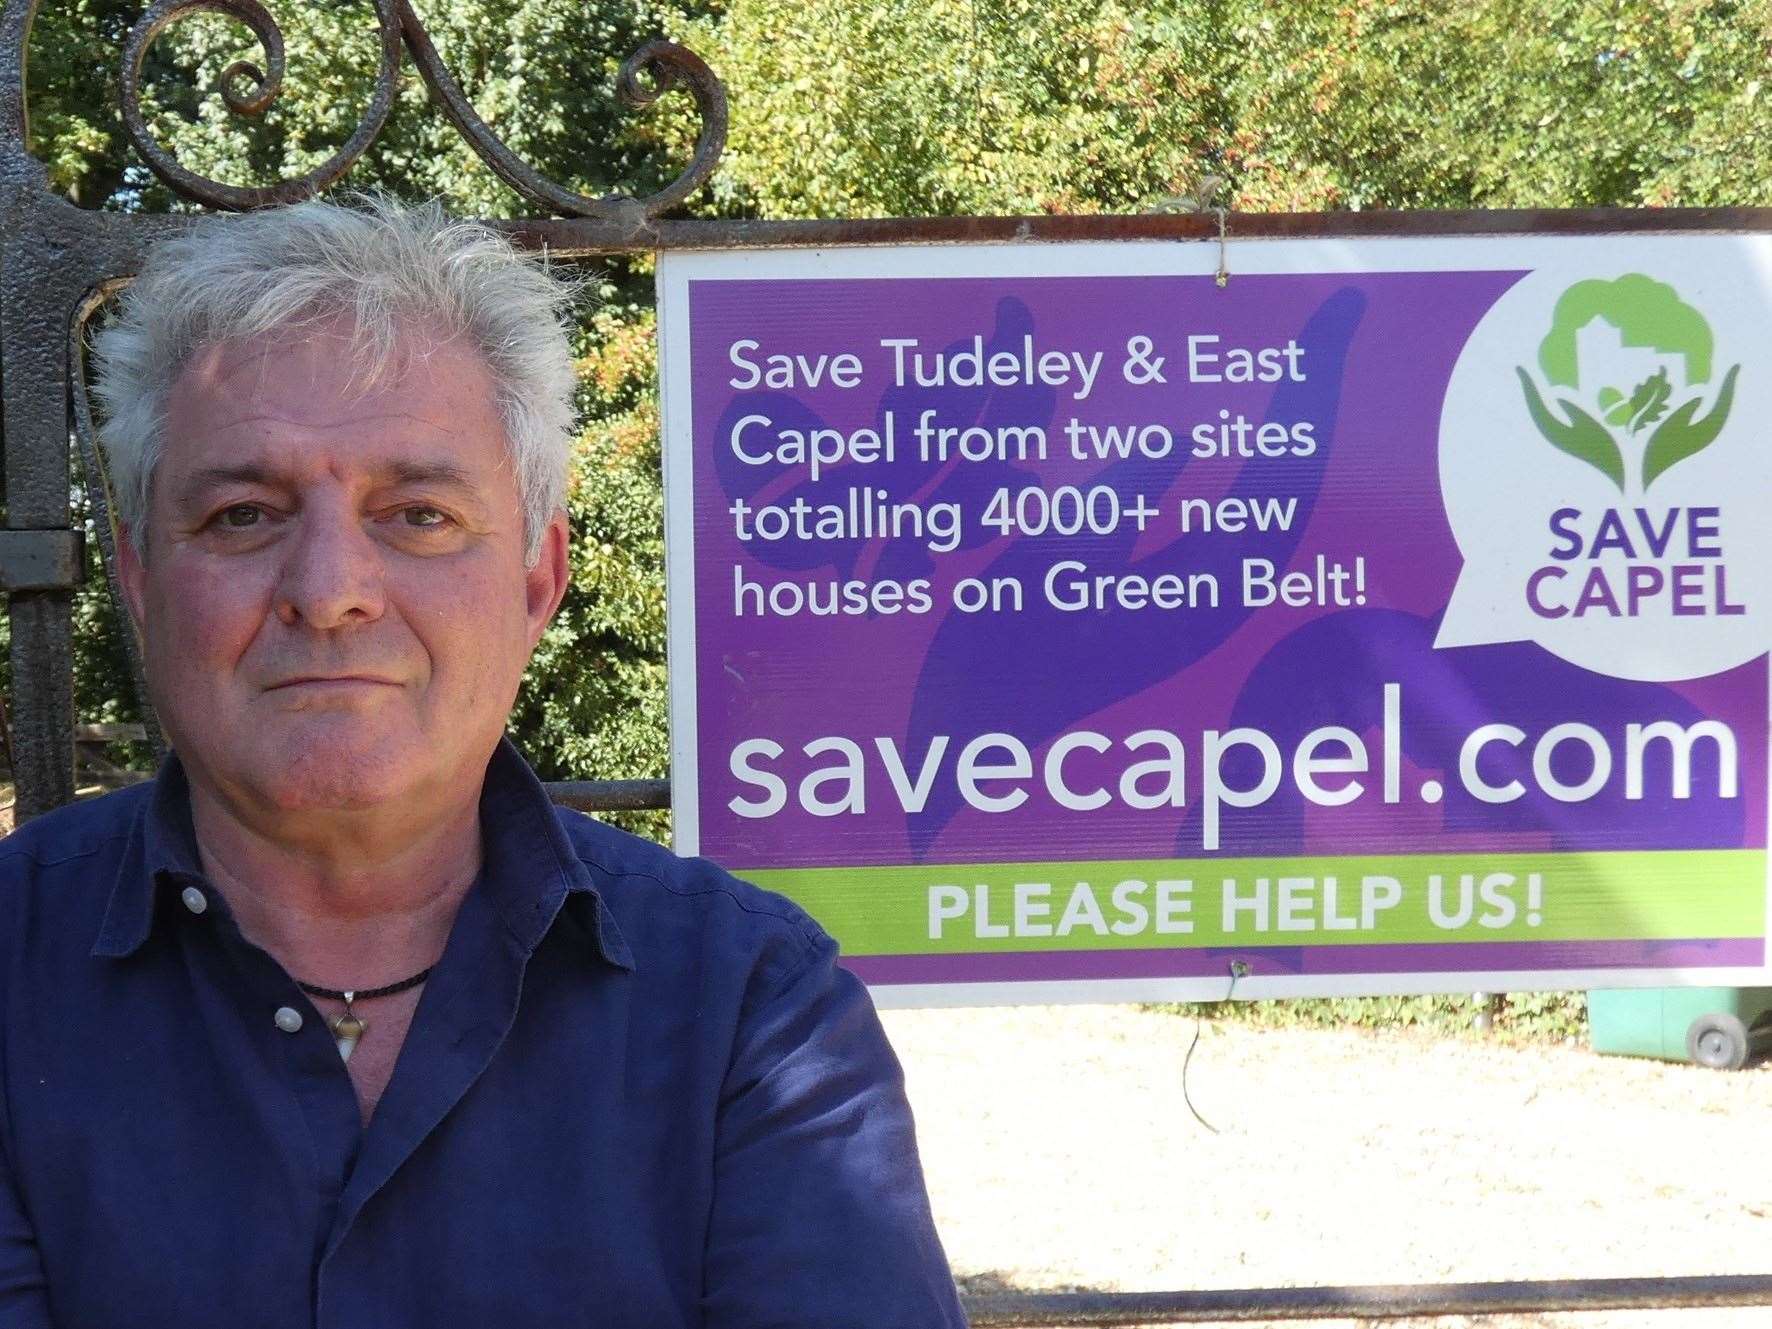 Dave Lovell, chairman of Save Capel